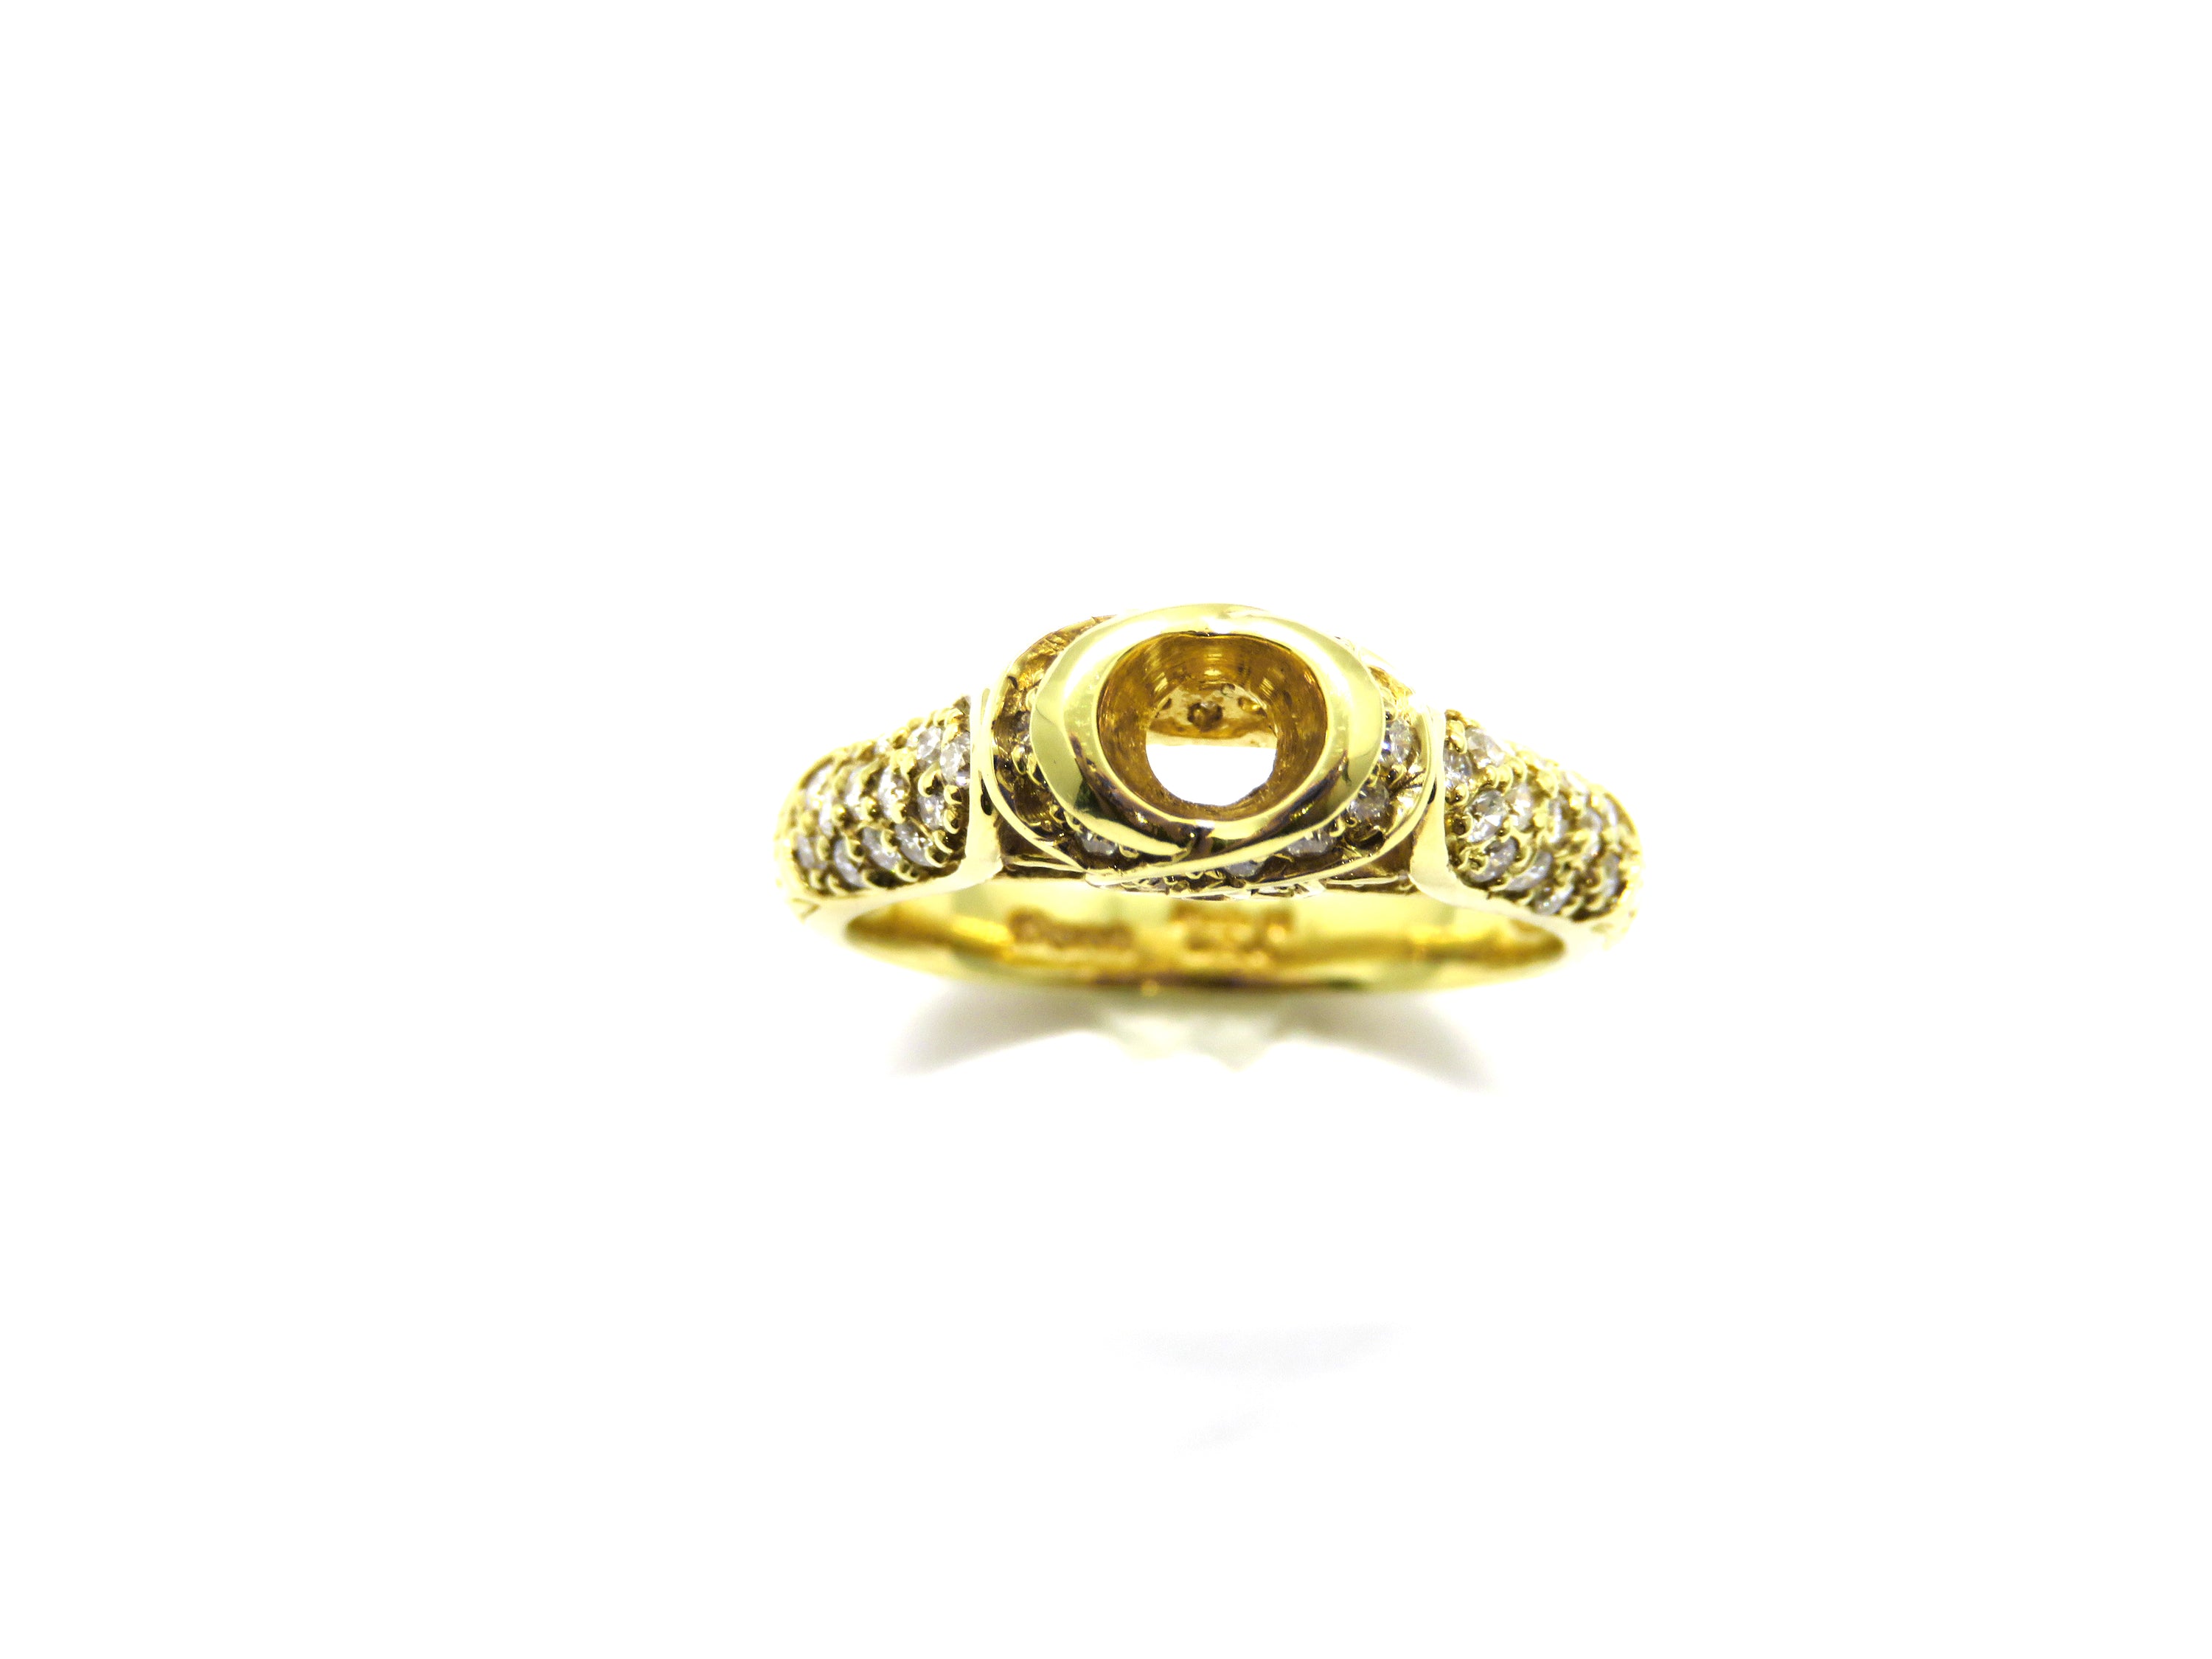 18kt Yellow Gold Fashion Ring with Emerald & Diamonds